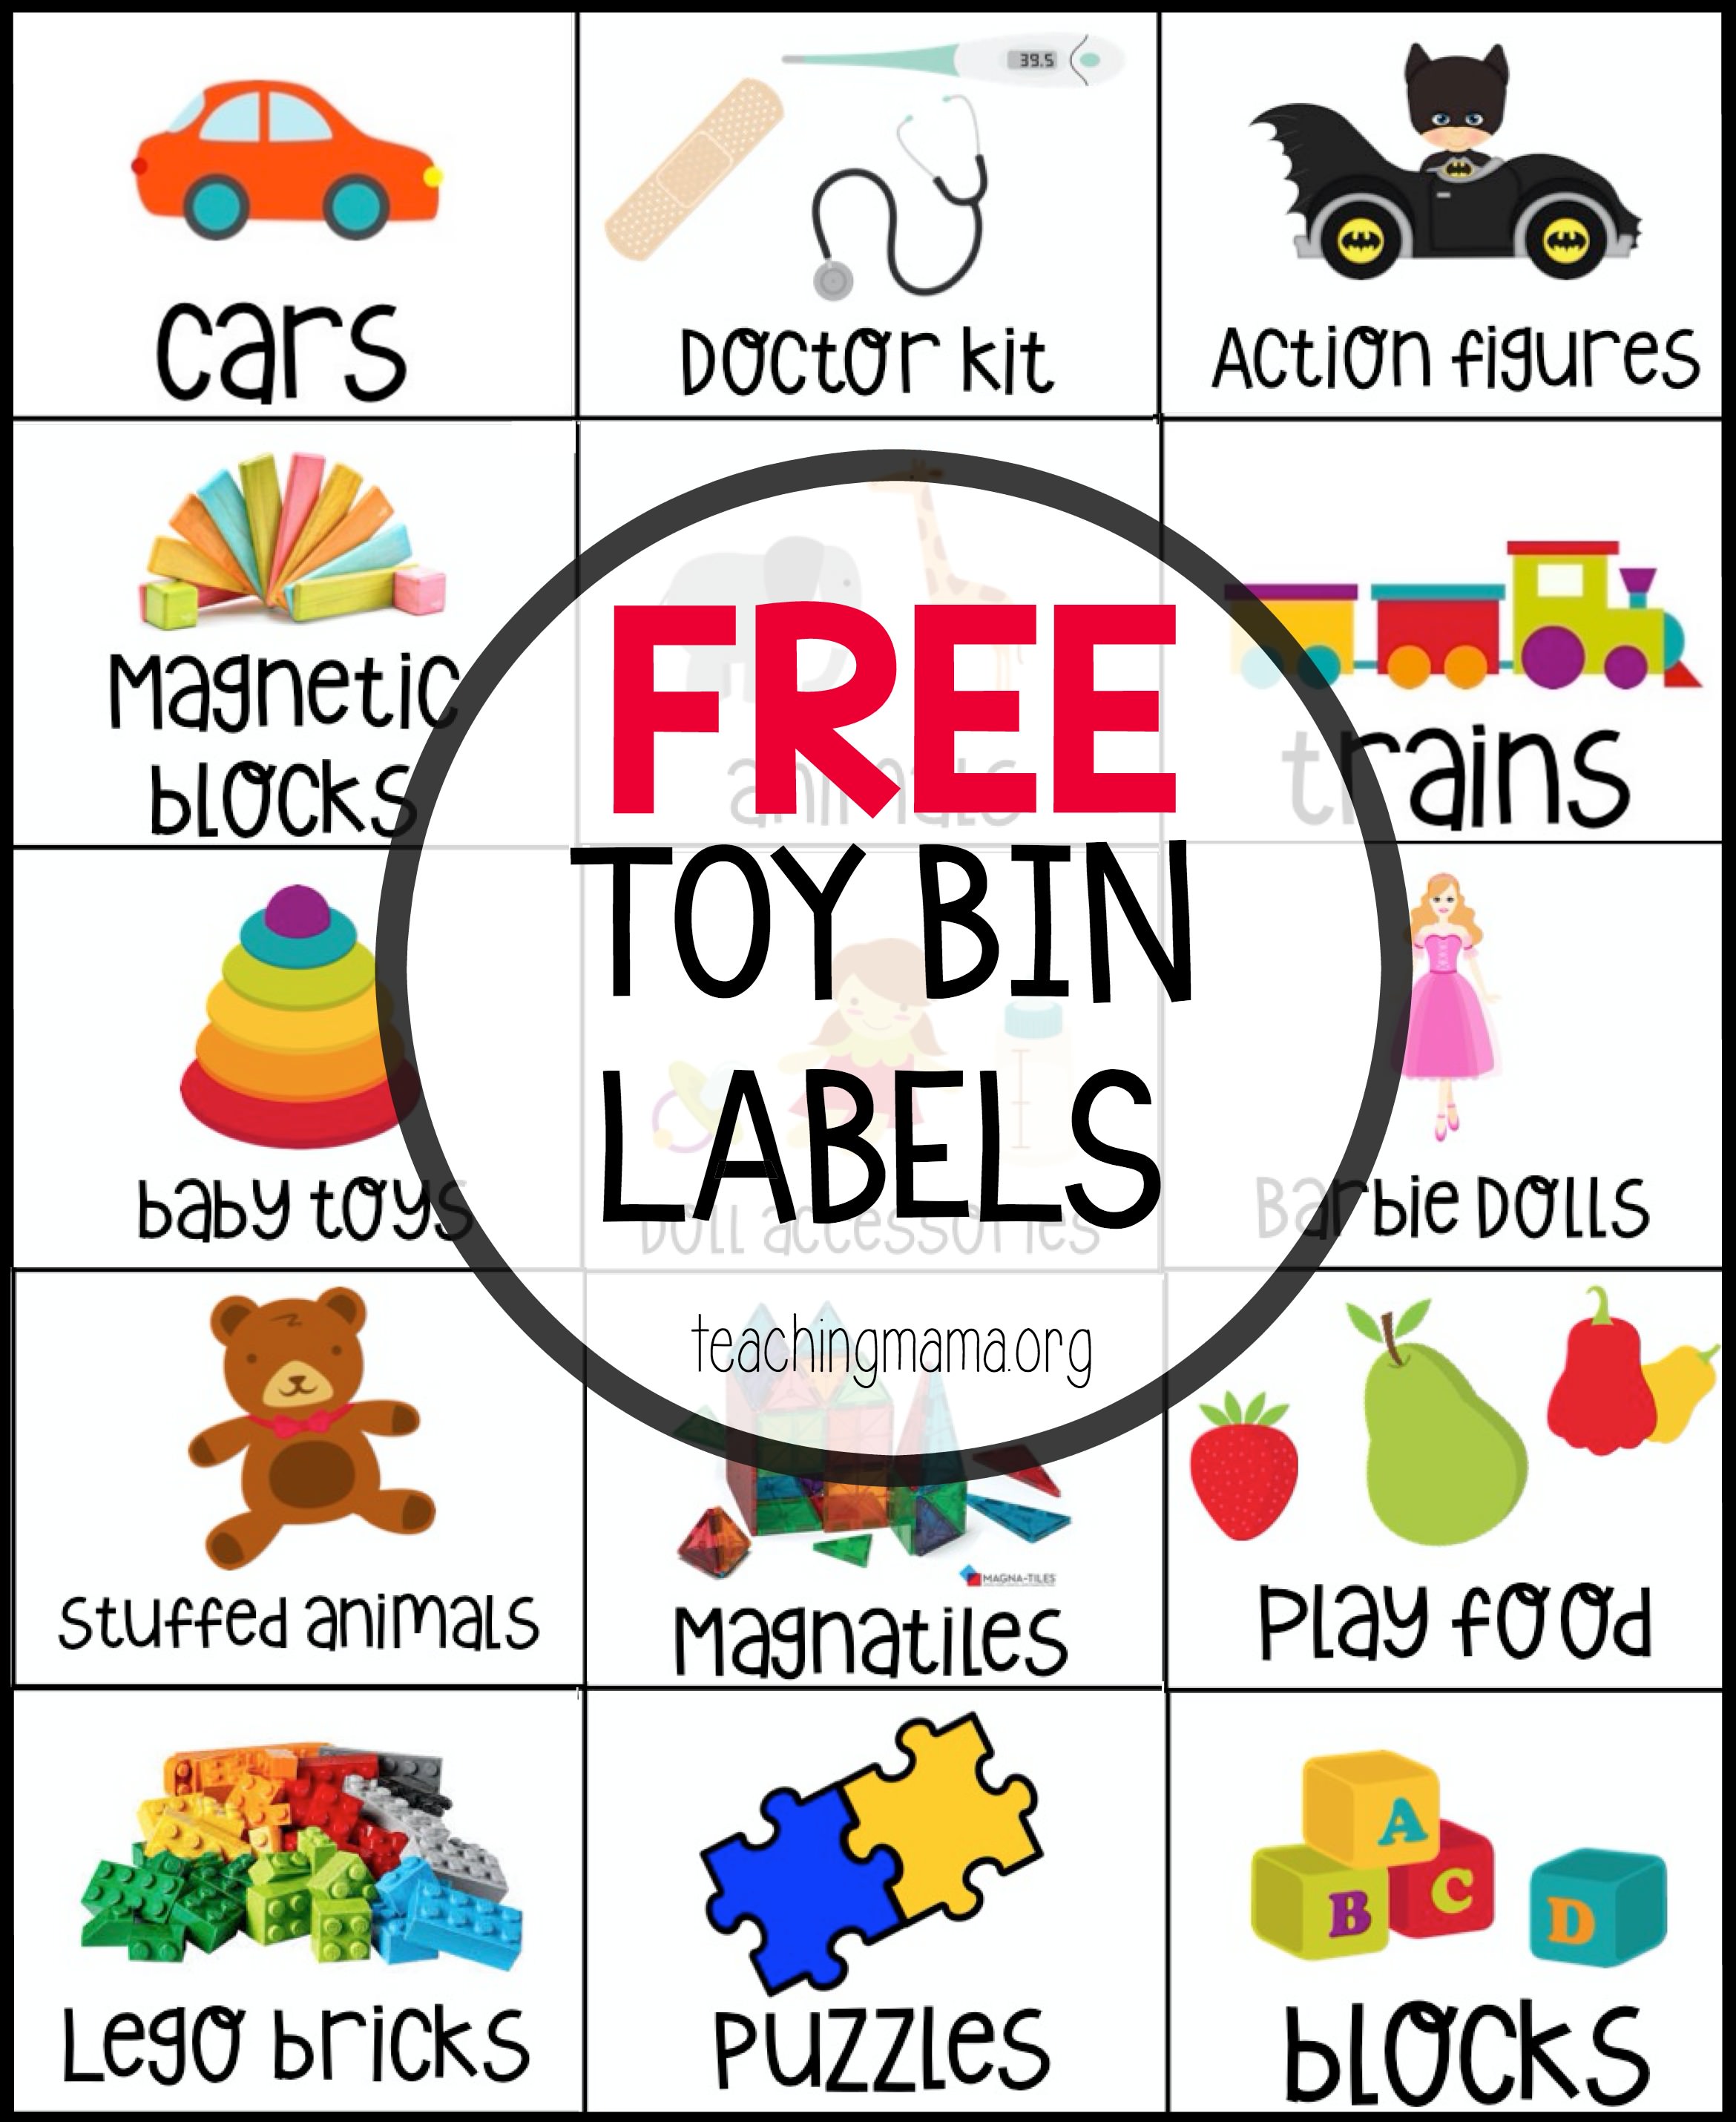 Free Toy Bin Labels poster.